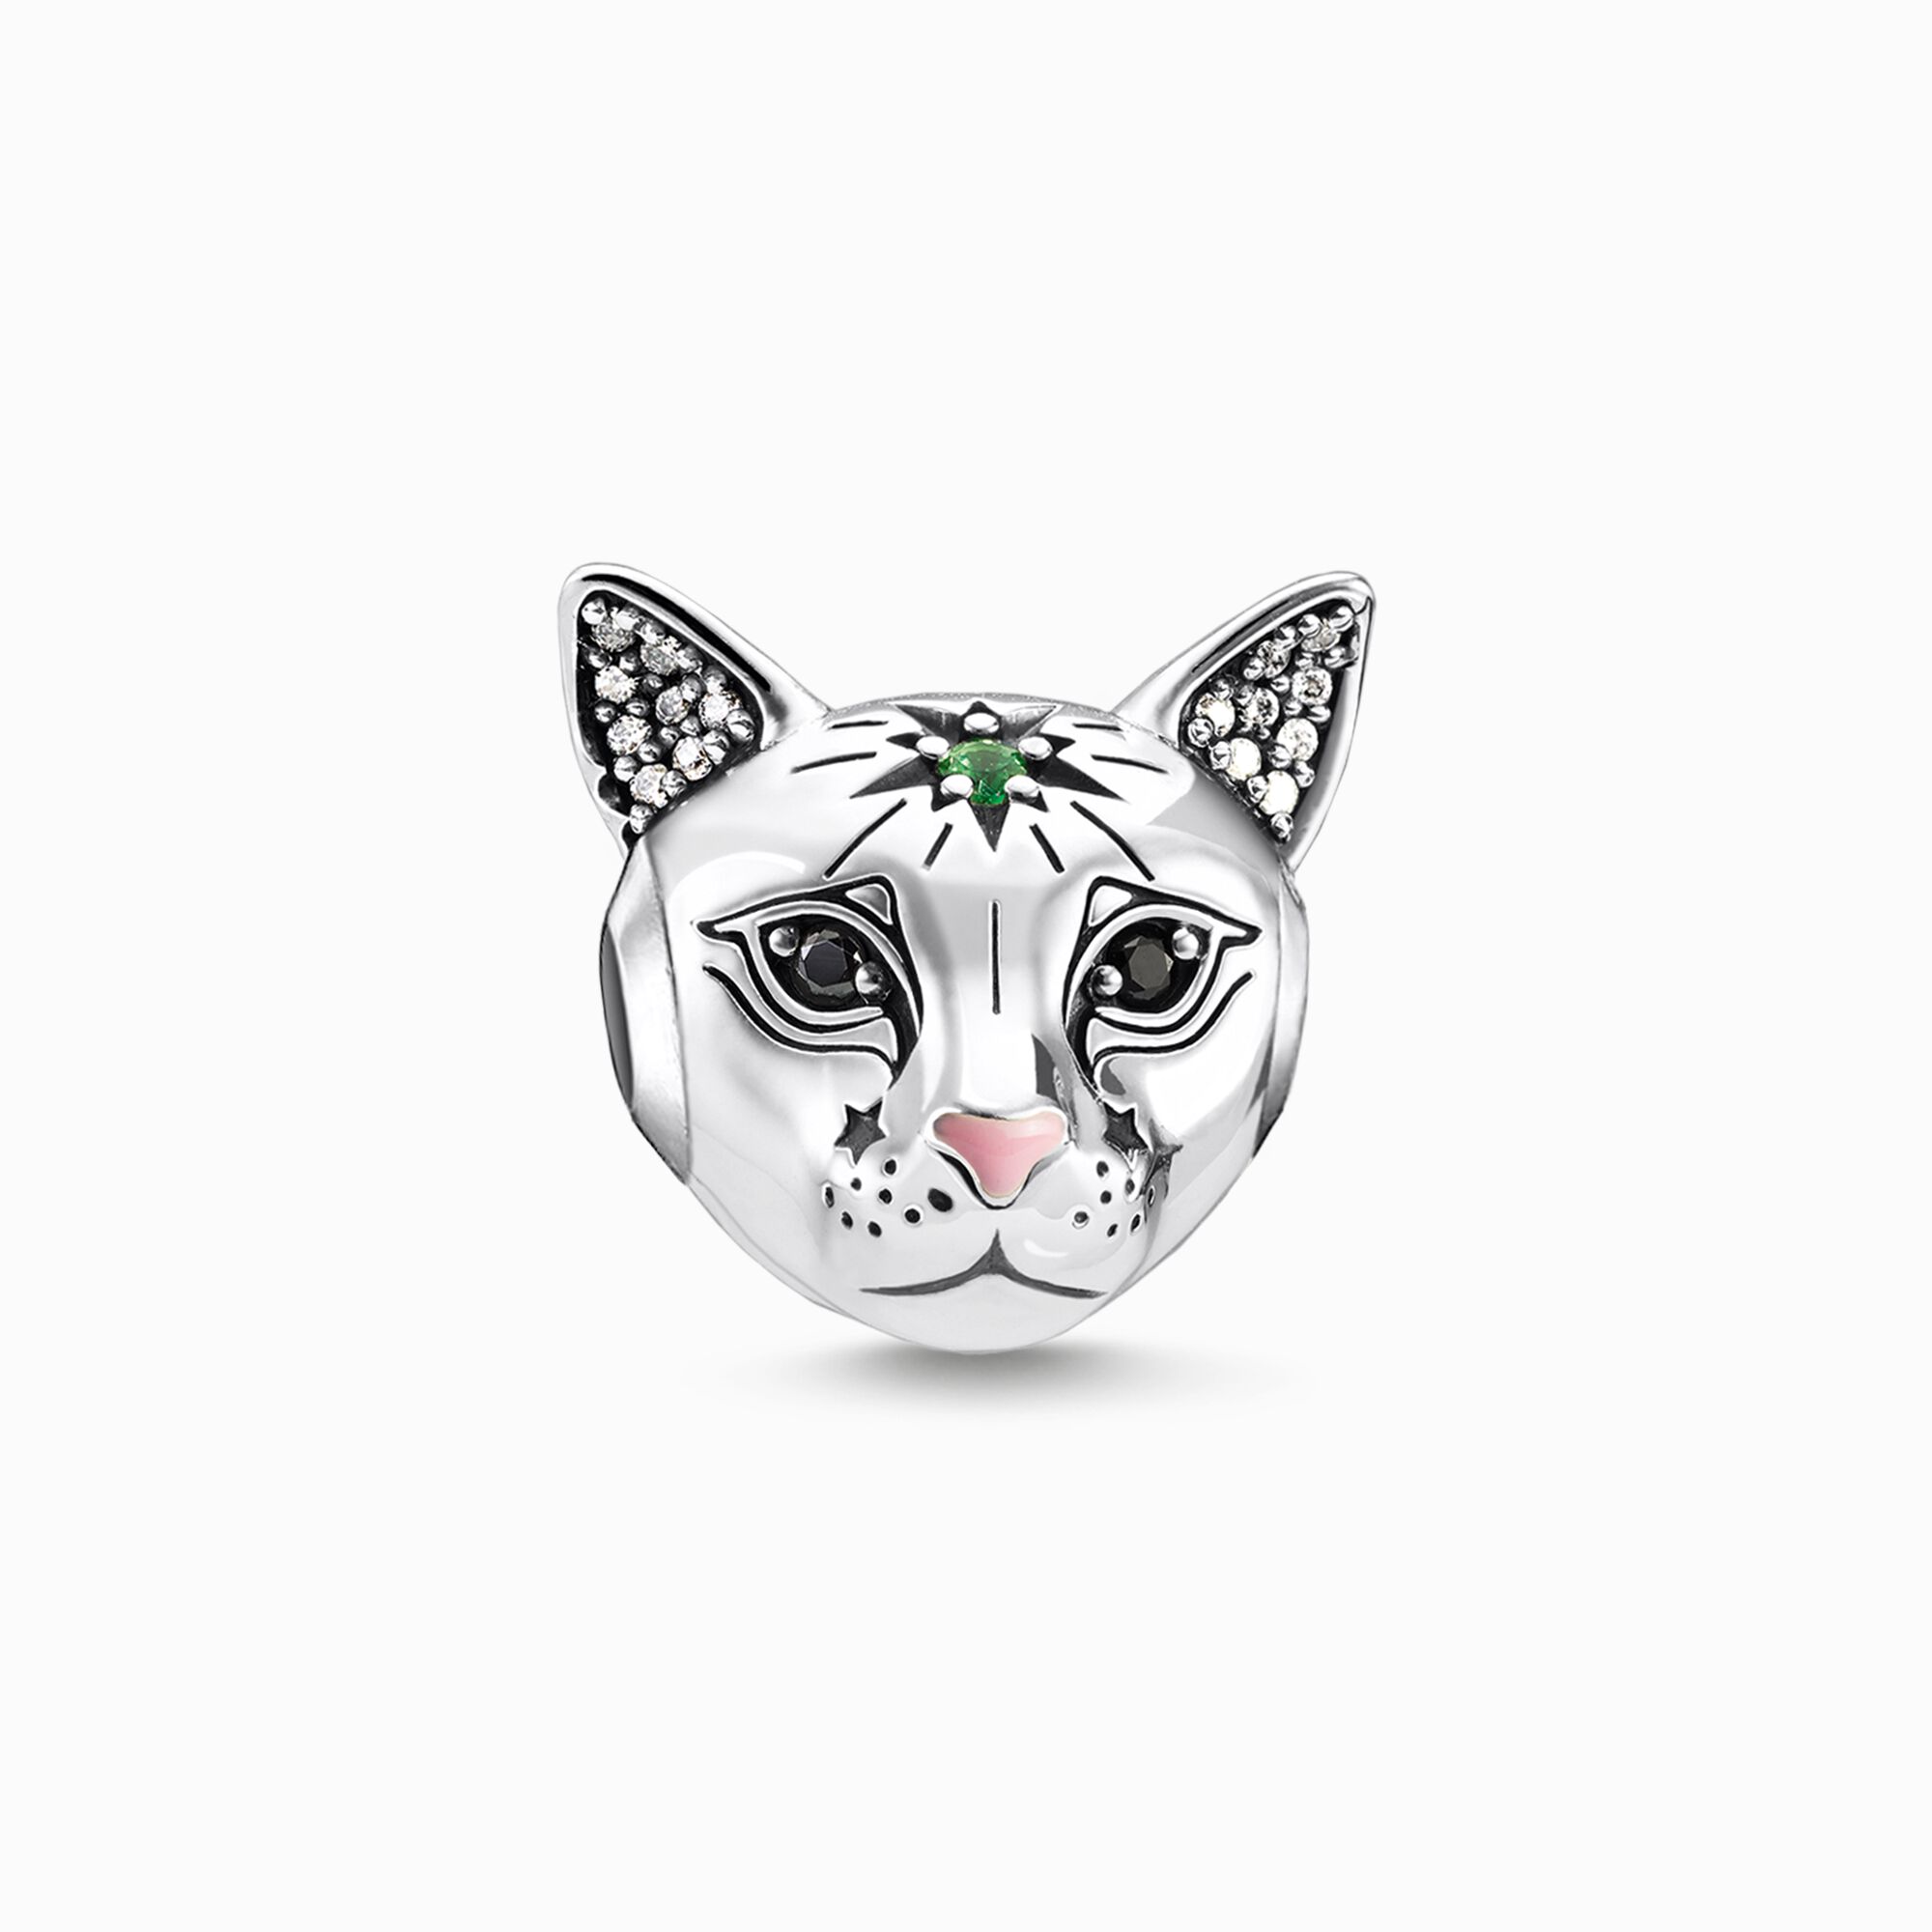 Bead Cat silver from the Karma Beads collection in the THOMAS SABO online store